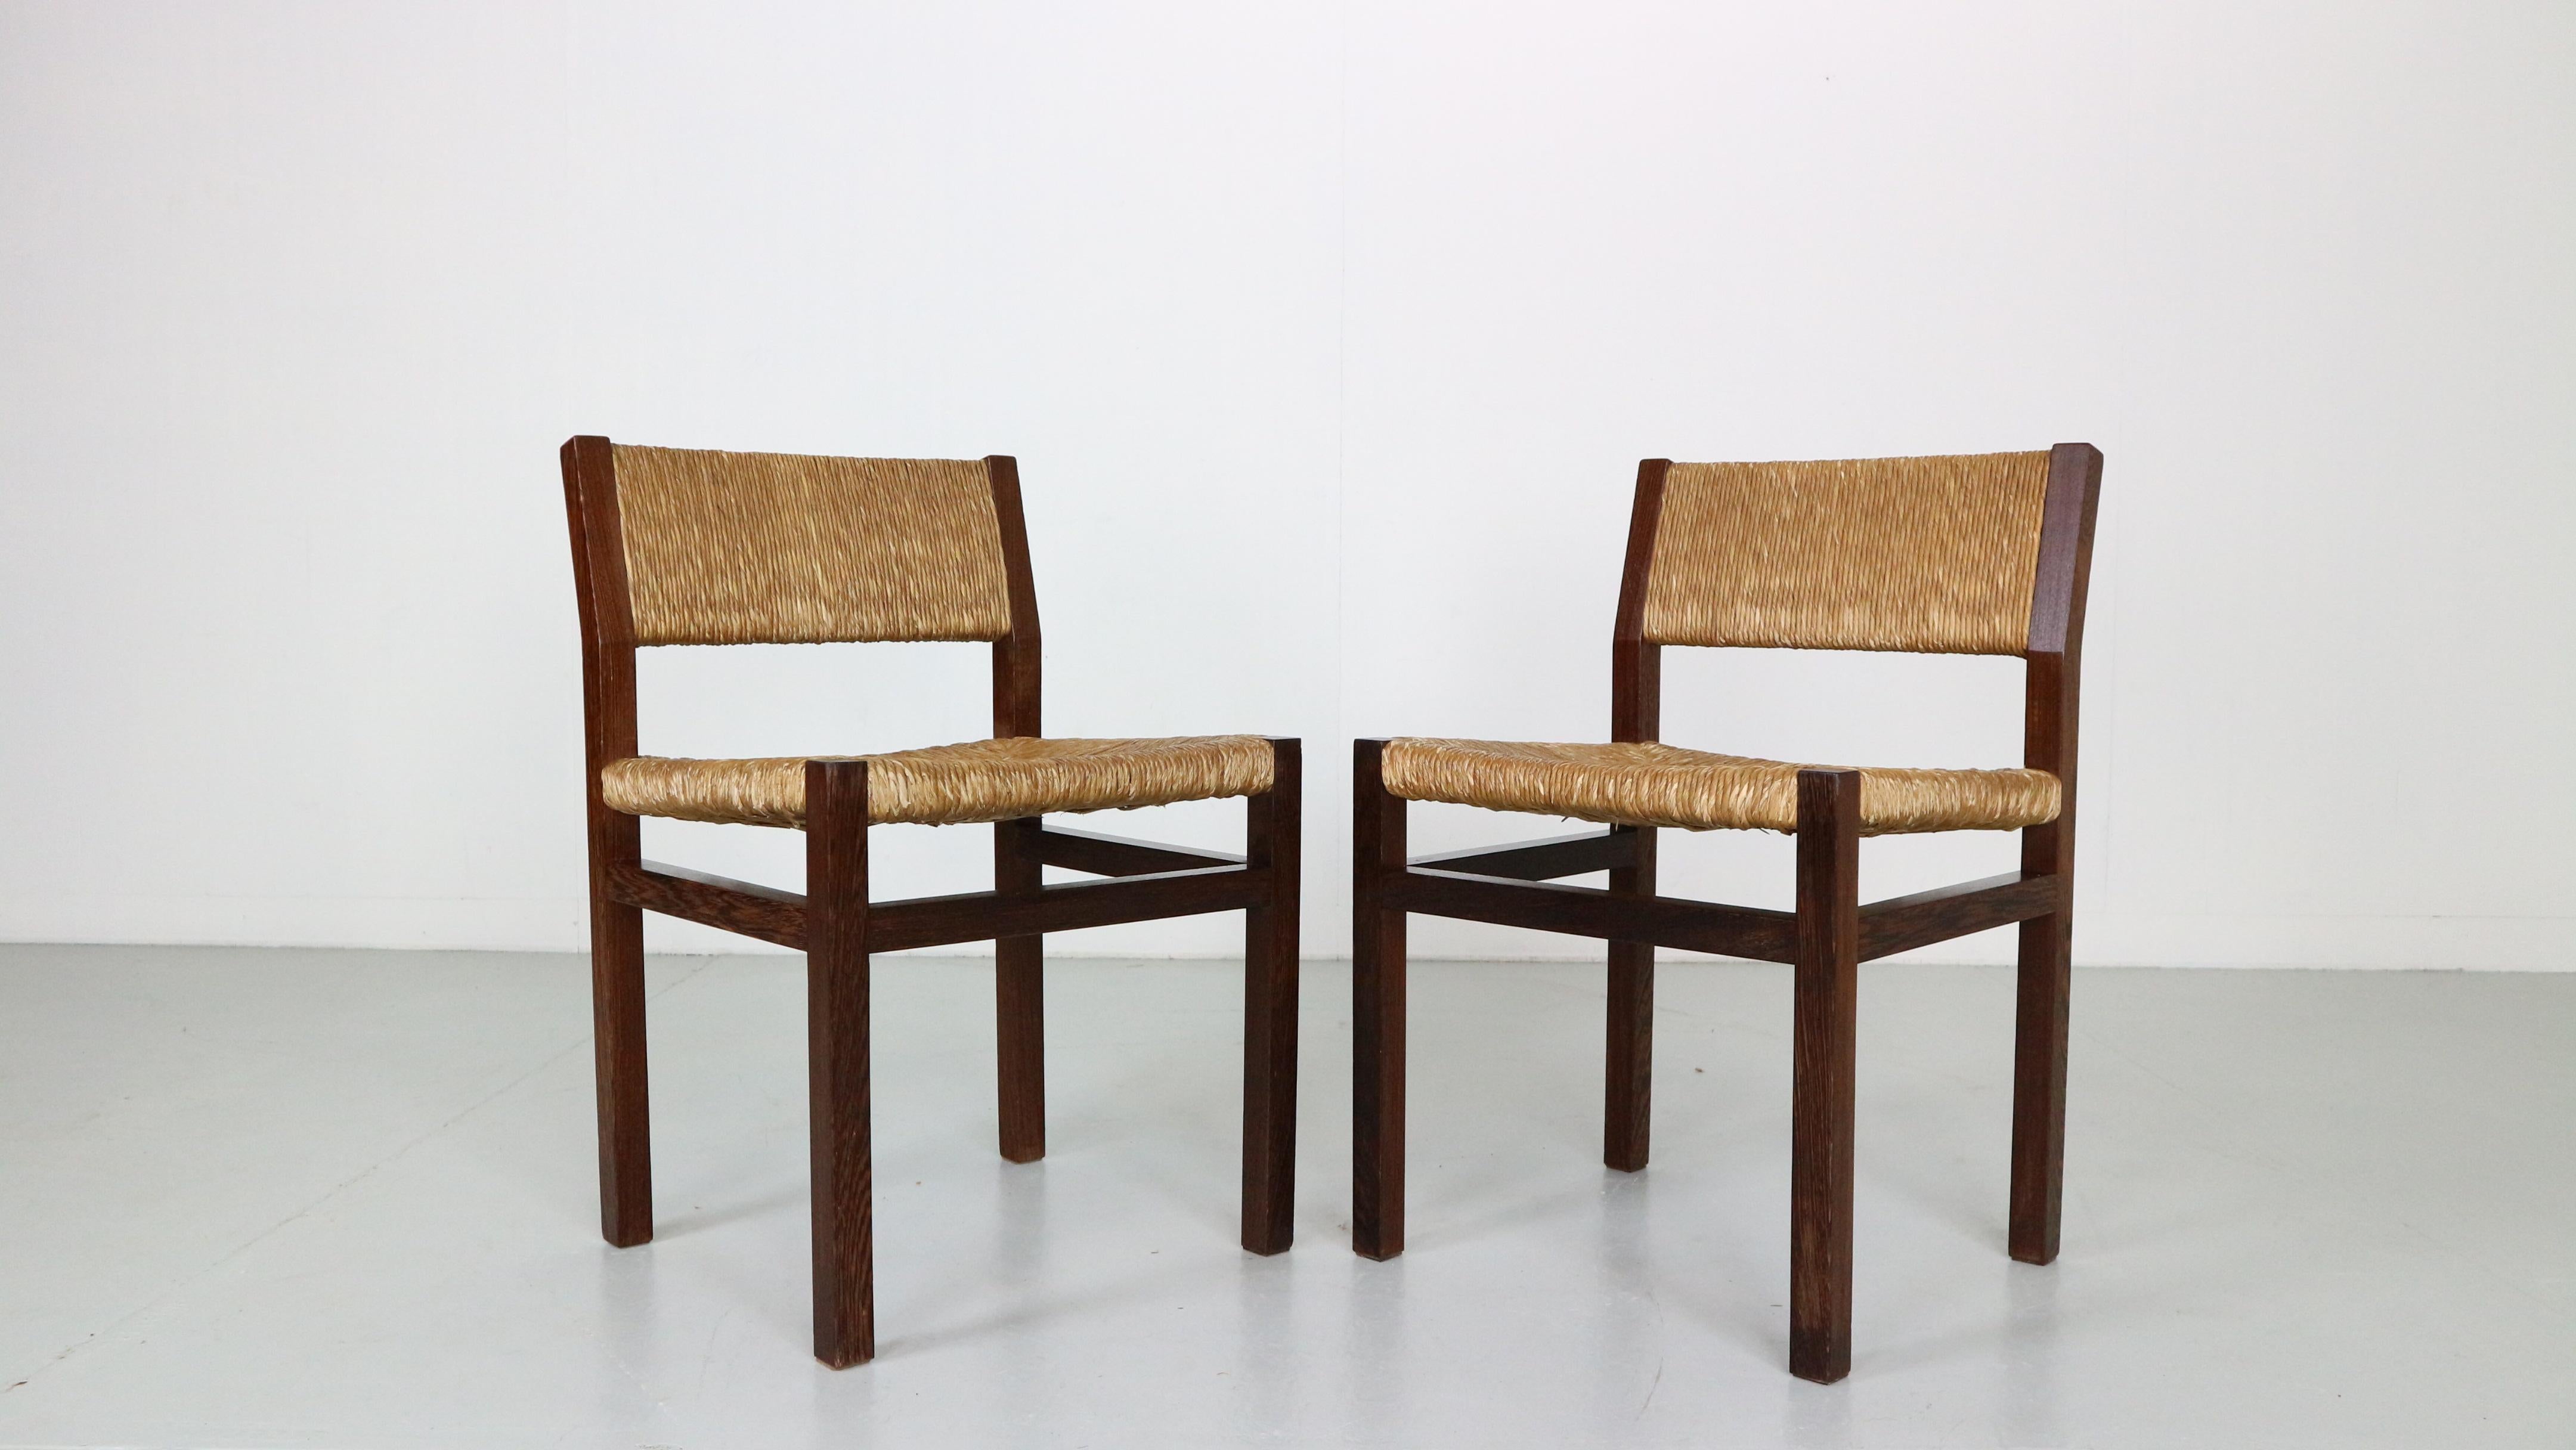 Mid-Century Modern period set of 2 dinning rooms chairs designed by famous Dutch furniture designer Martin Visser and manufactured by t-spectrum around 1970s period, Netherlands.

The set of the chairs is in original good condition due to it's age